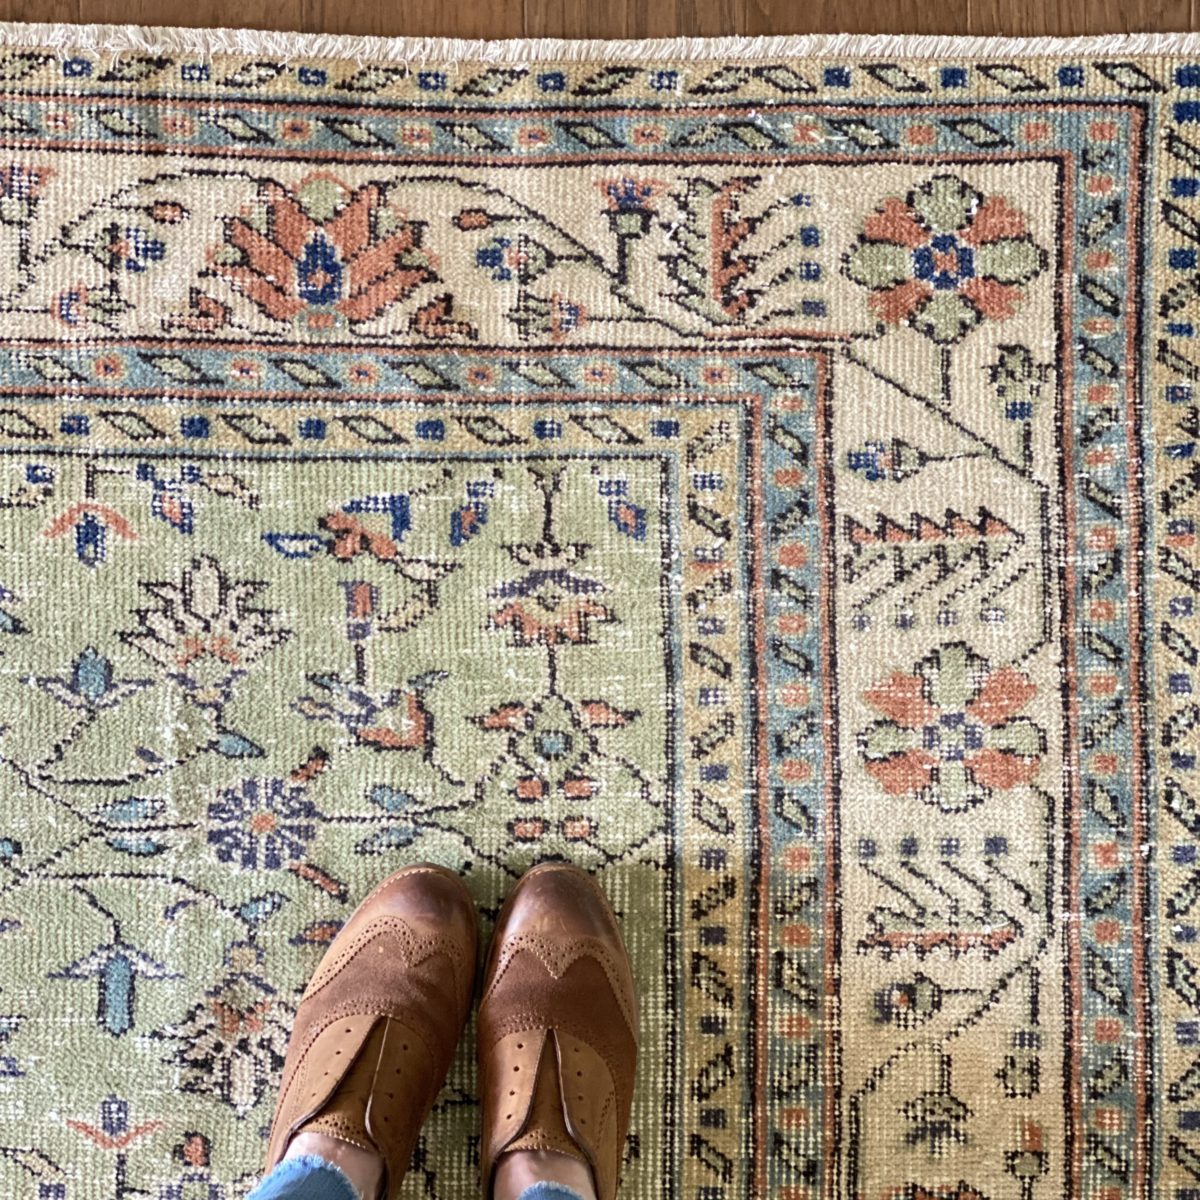 Standing on the corner of the rug, I am in Revival rug love.